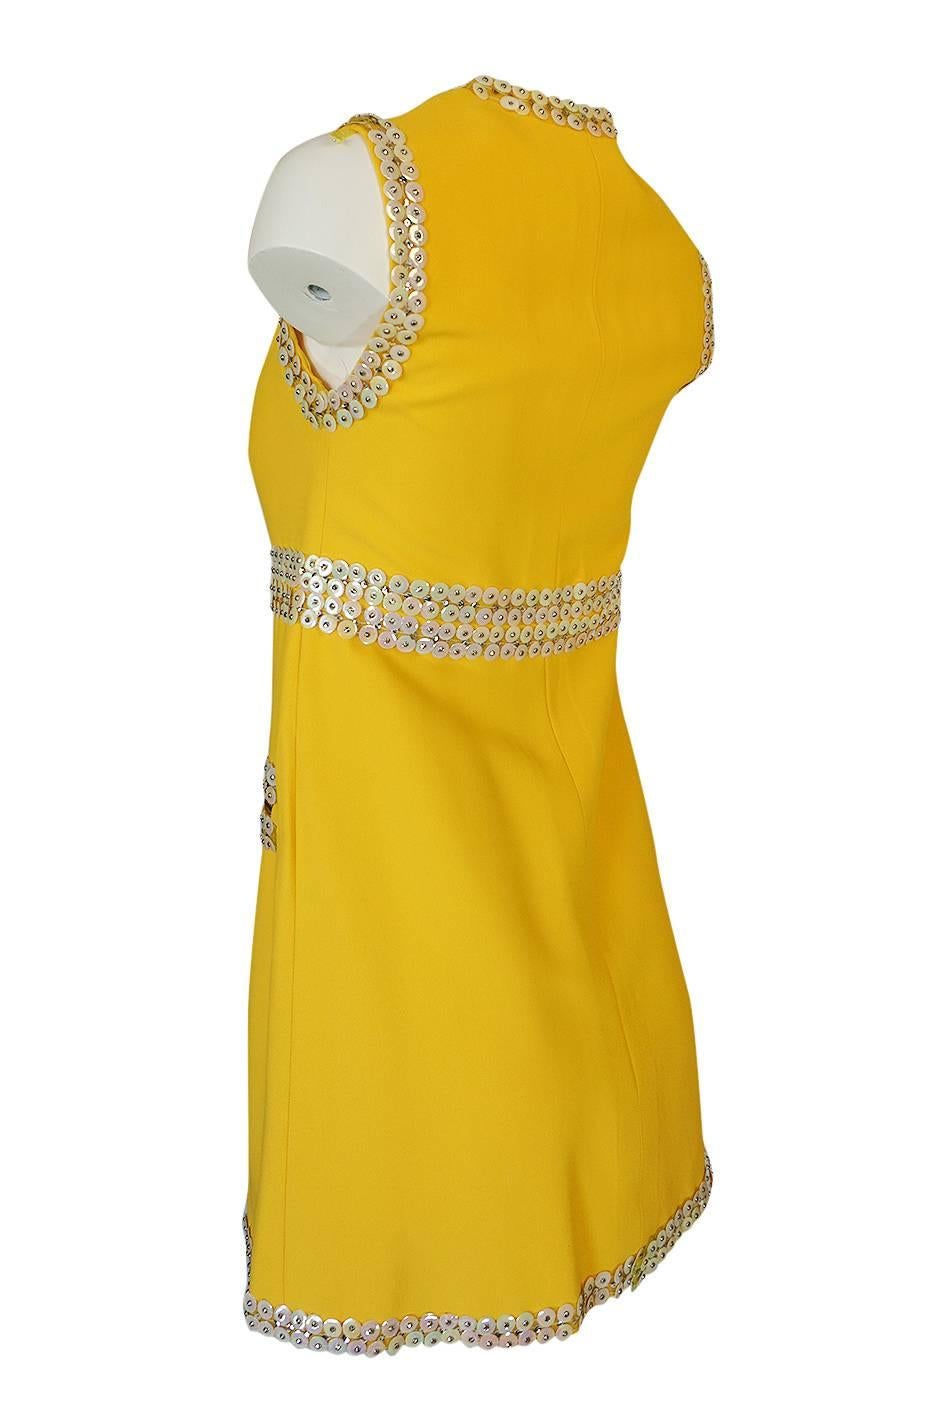 Chloe by Karl Lagerfeld Stud and Paillettes Yellow Mini Dress circa 1967 1